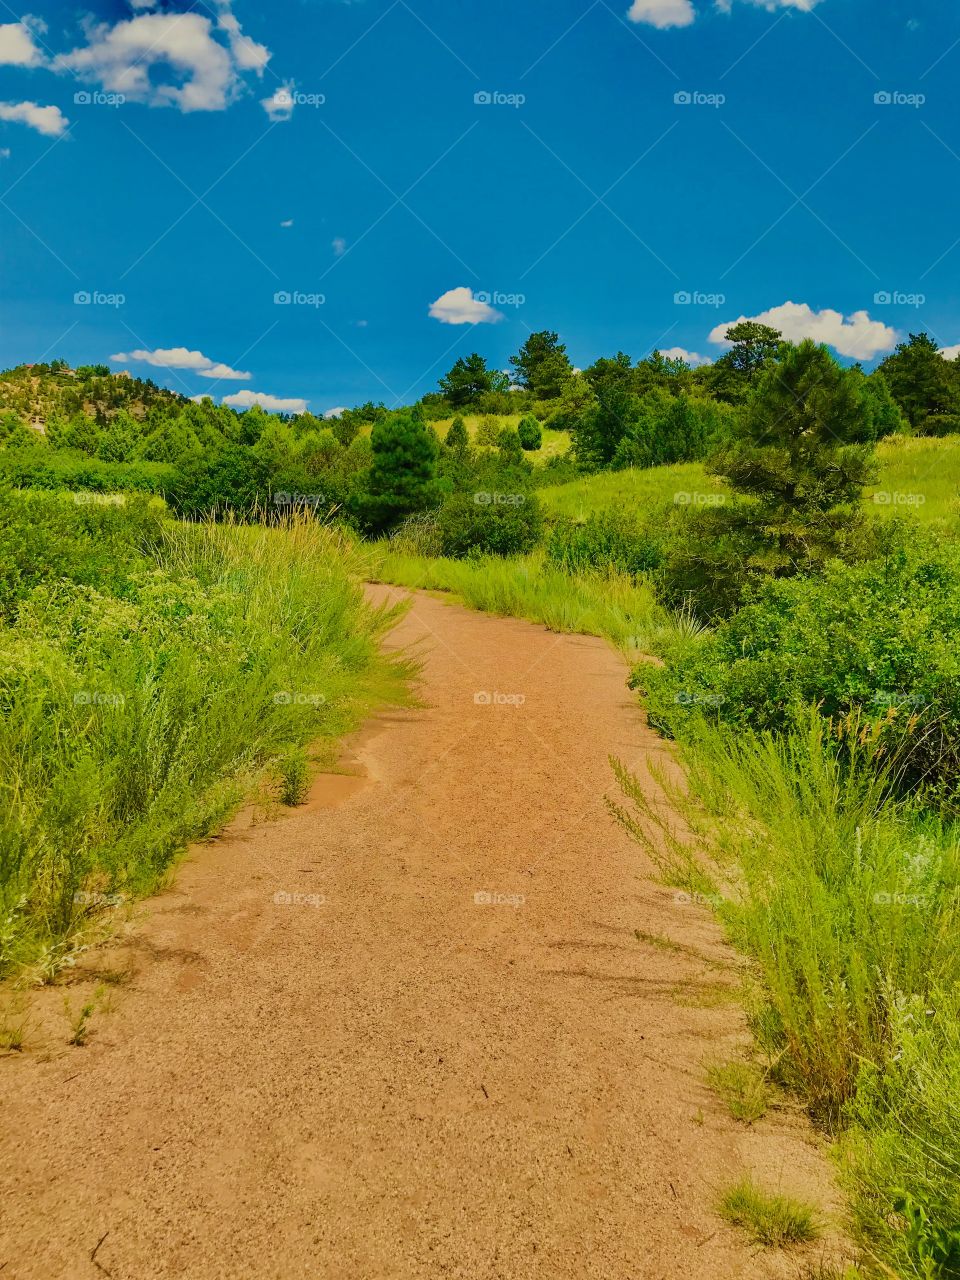 Hike through Austin Bluffs Open Space in Colorado Springs on a beautiful summer day. A great place for biking, hiking and dog walking